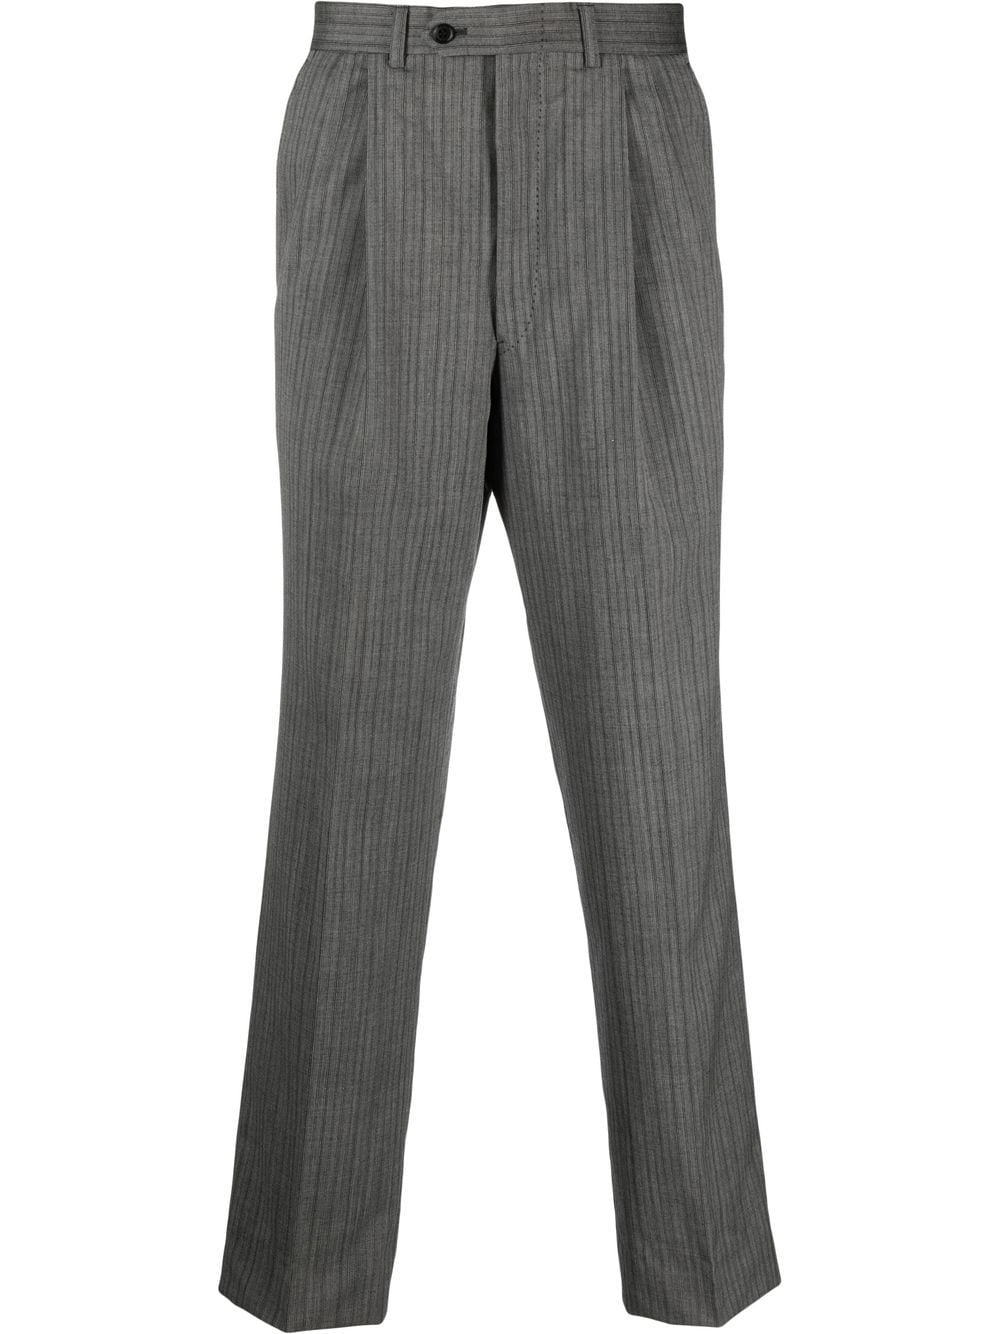 1980s pinstriped tailored trousers